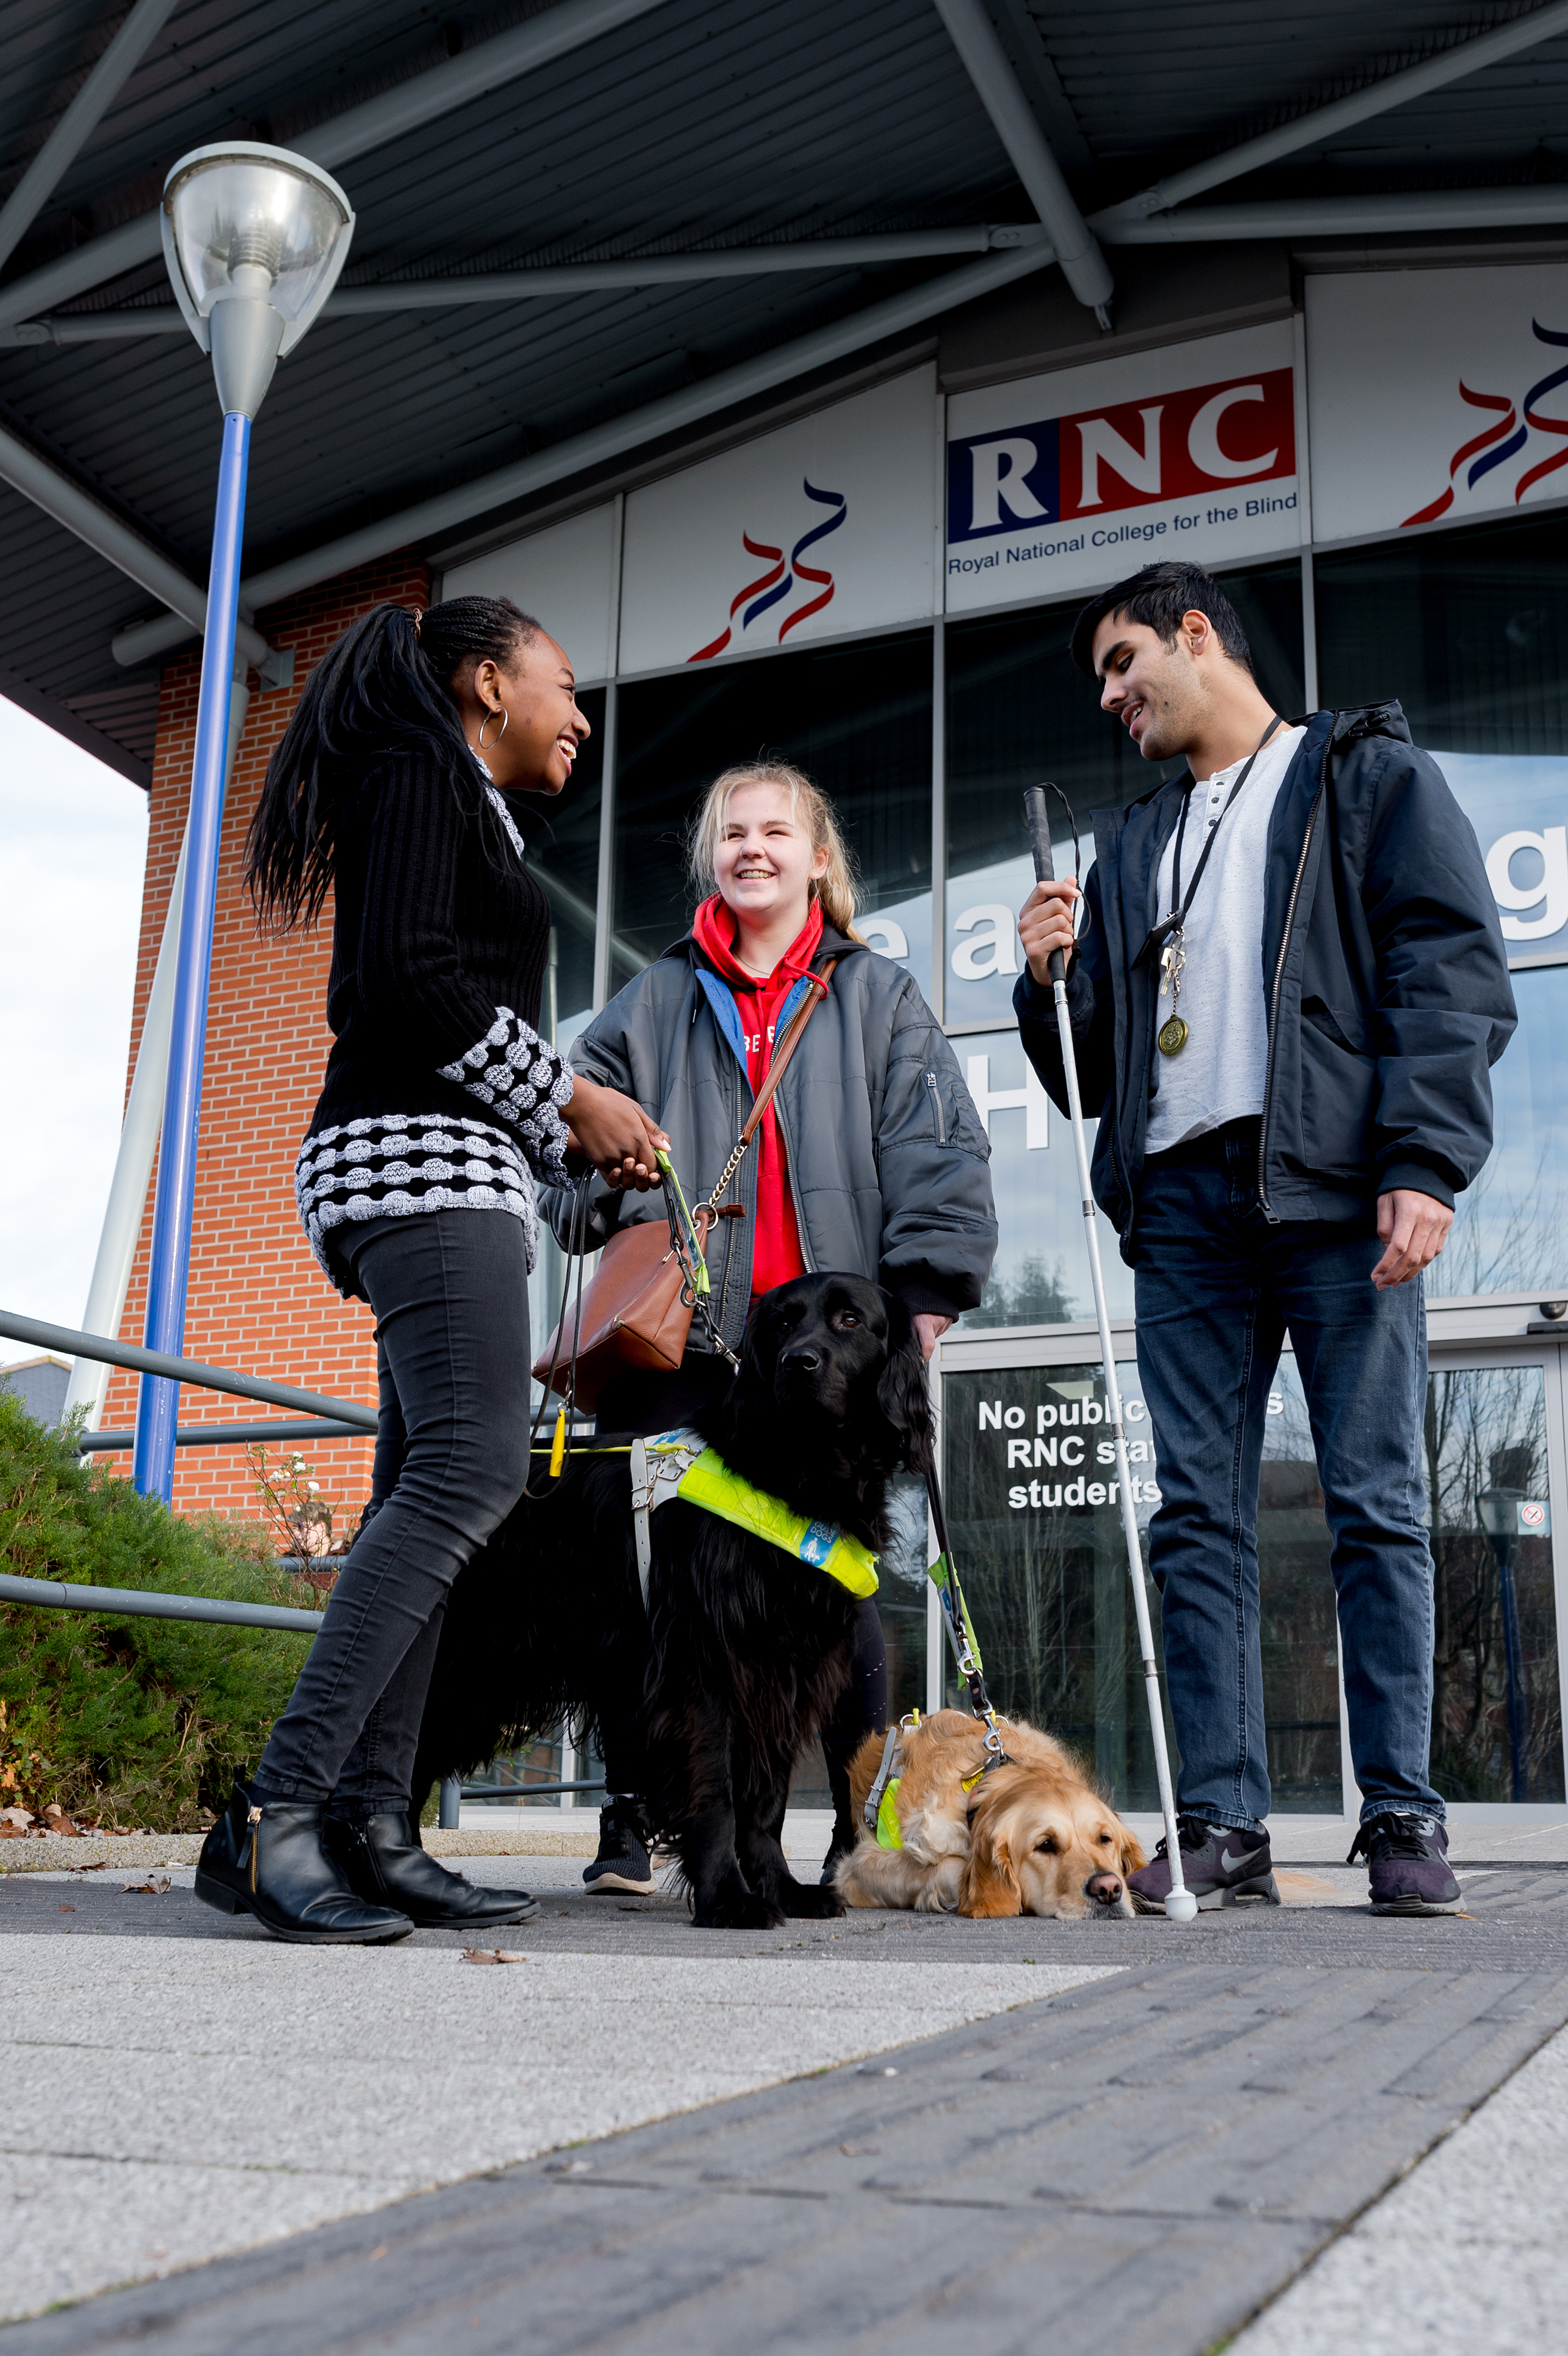 Leading charities that help people with visual impairments have come together